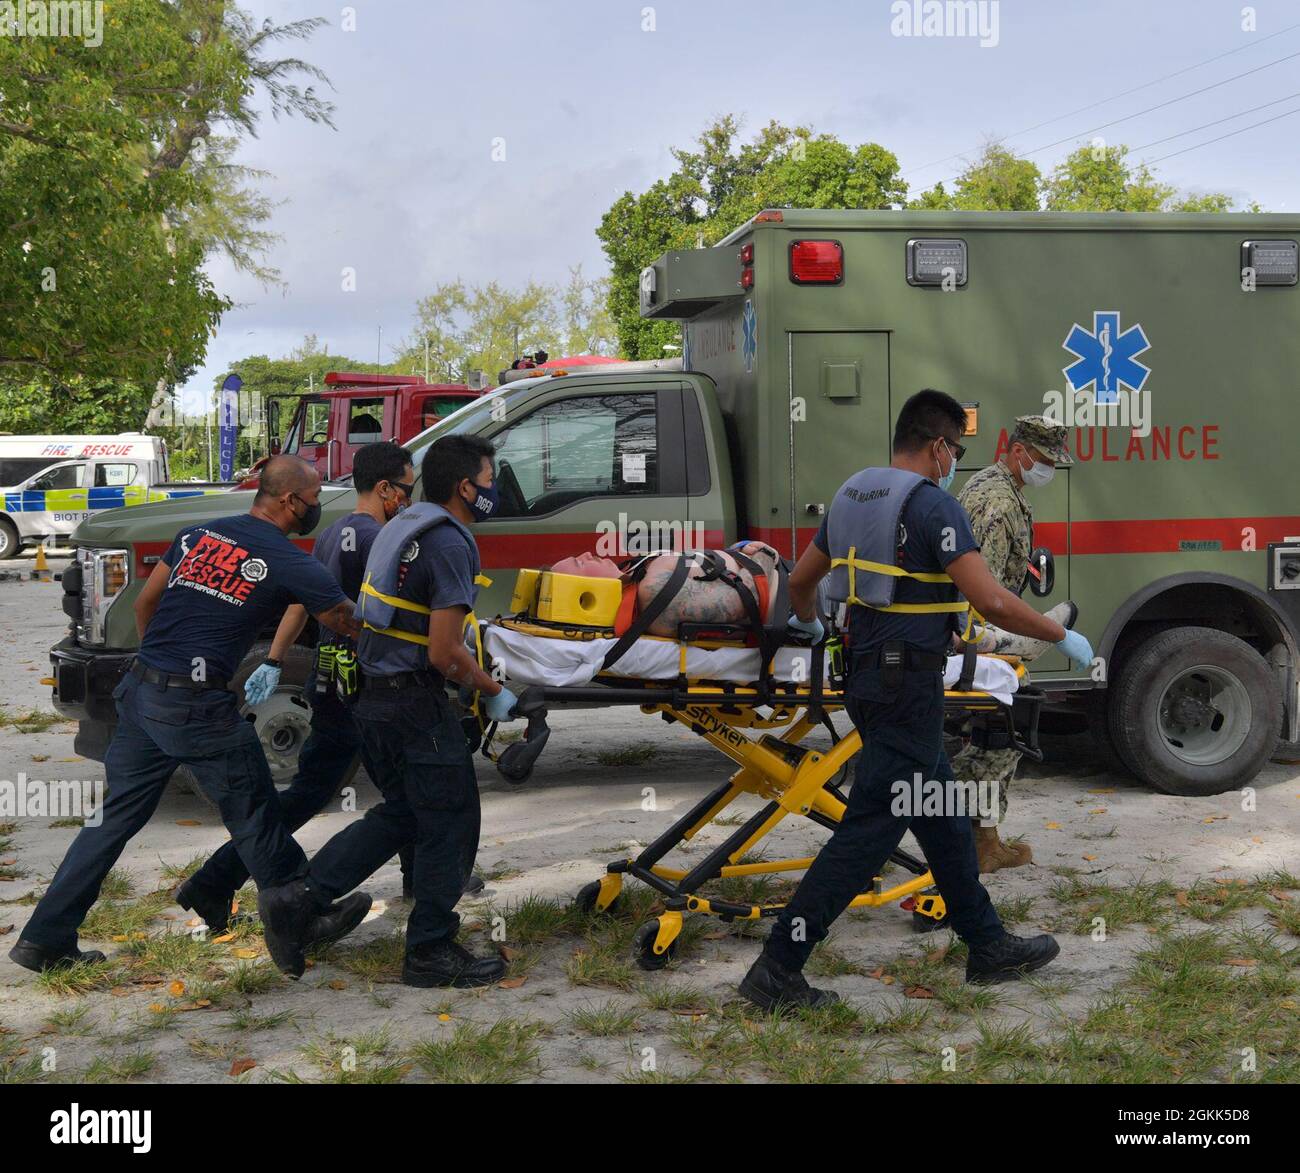 DIEGO GARCIA, British Indian Ocean Territory (May 12, 2021) – U.S. Navy Sailors along with first responders transport a shark attack victim with a gurney to an ambulance during a drill on Diego Garcia, May 12, 2021. U.S. Navy Support Facility Diego Garcia provides logistic, service, recreational and administrative support to U.S. and allied forces forward deployed to the Indian Ocean and Arabian Gulf. Stock Photo